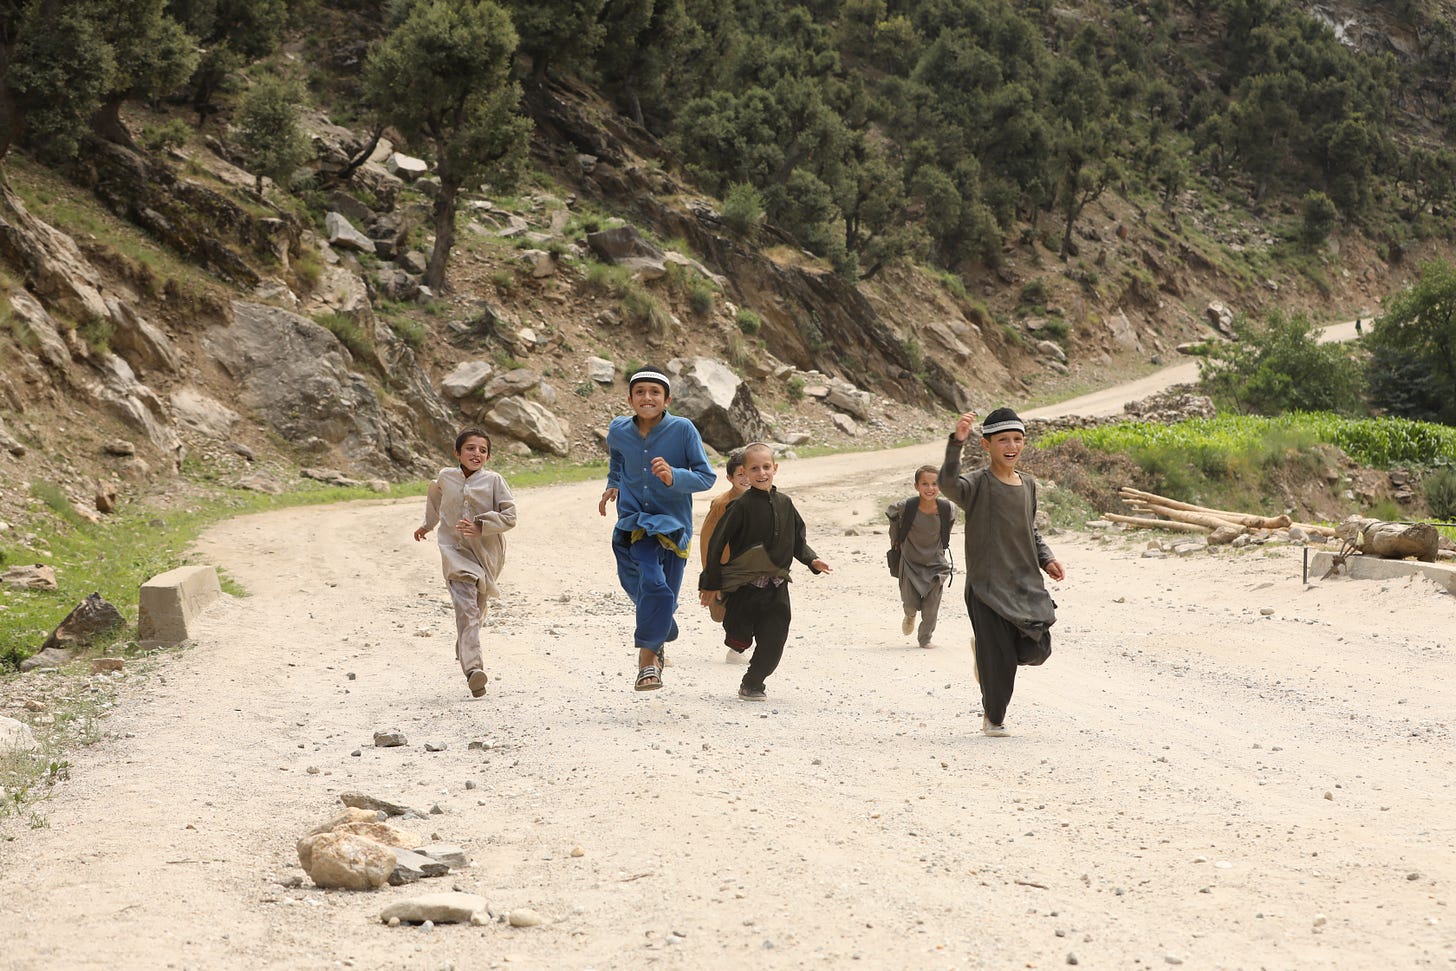 Six smiling children are running down a sandy road in Afghanistan.